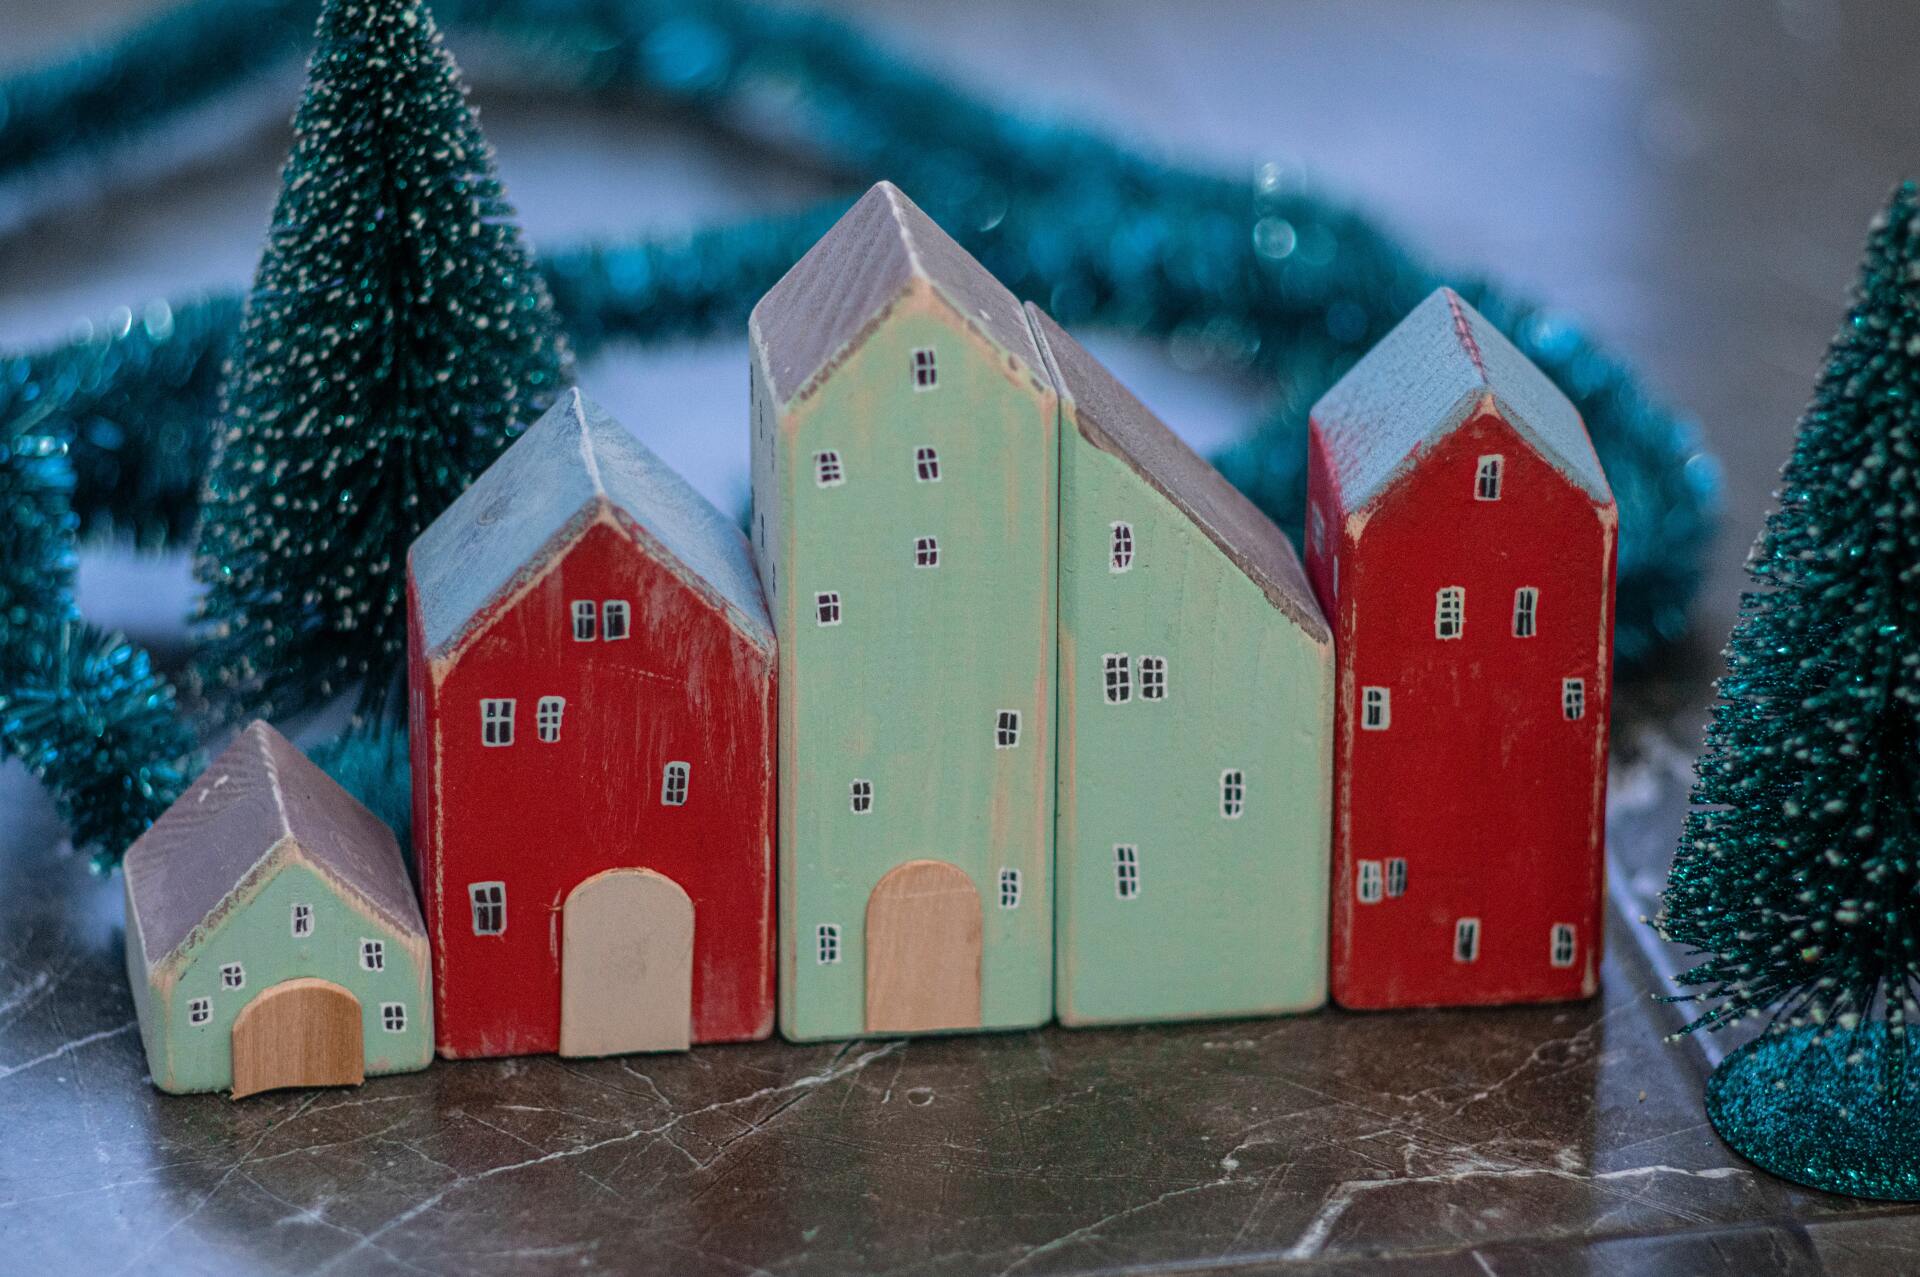 Red and mint green houses in a winter shop display